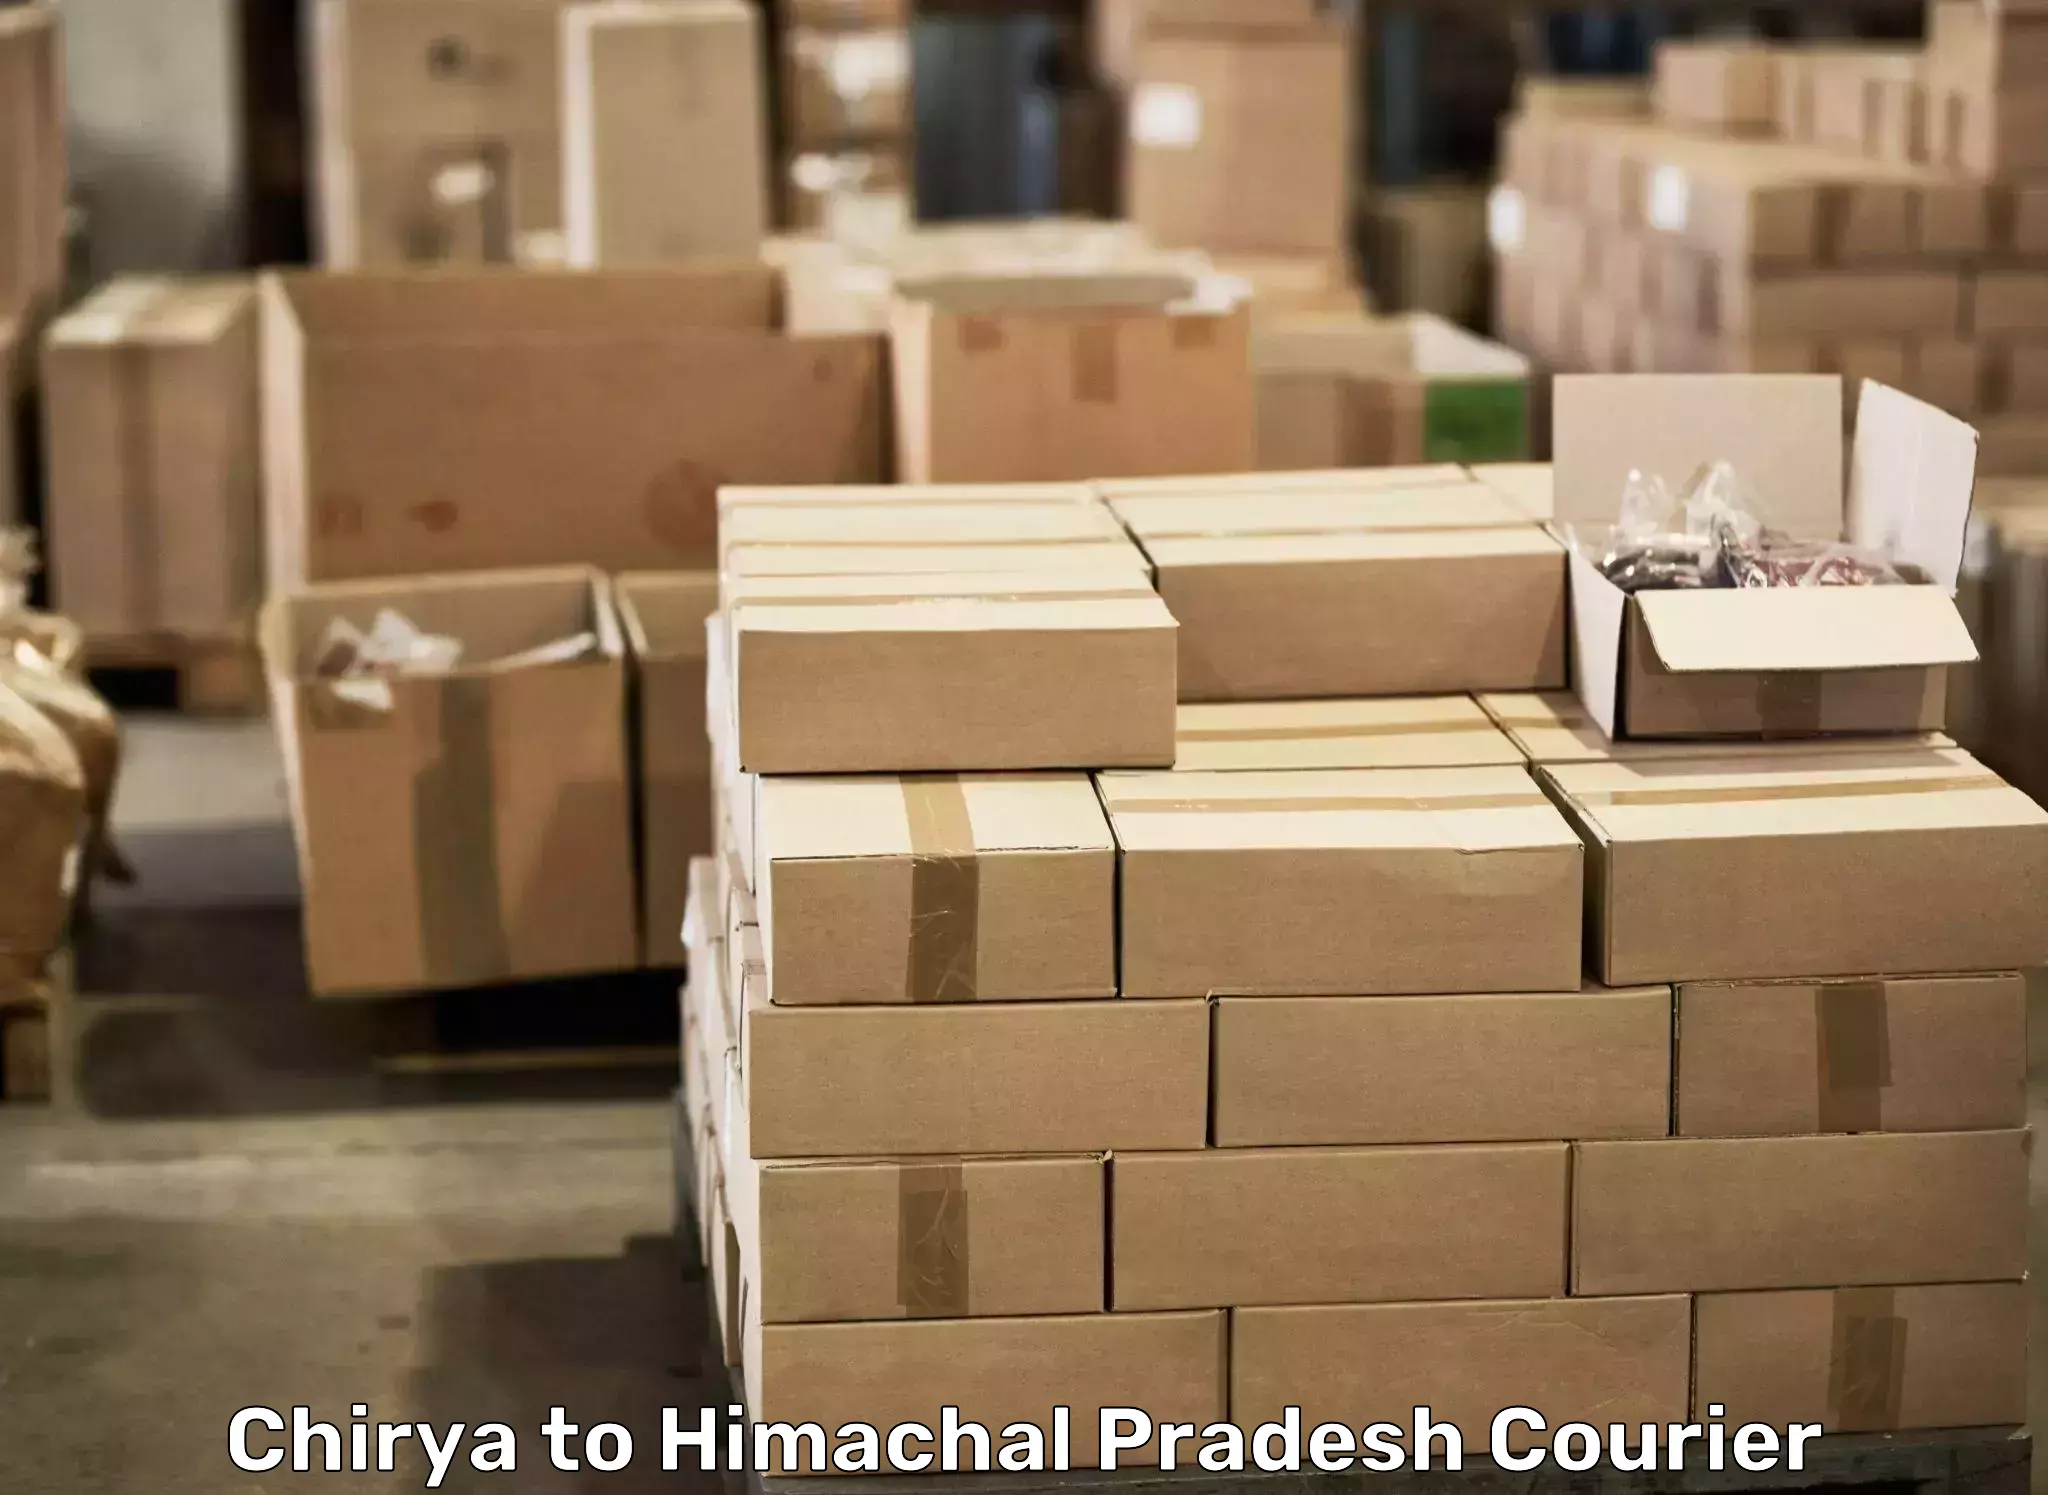 Furniture shipping services in Chirya to Dheera